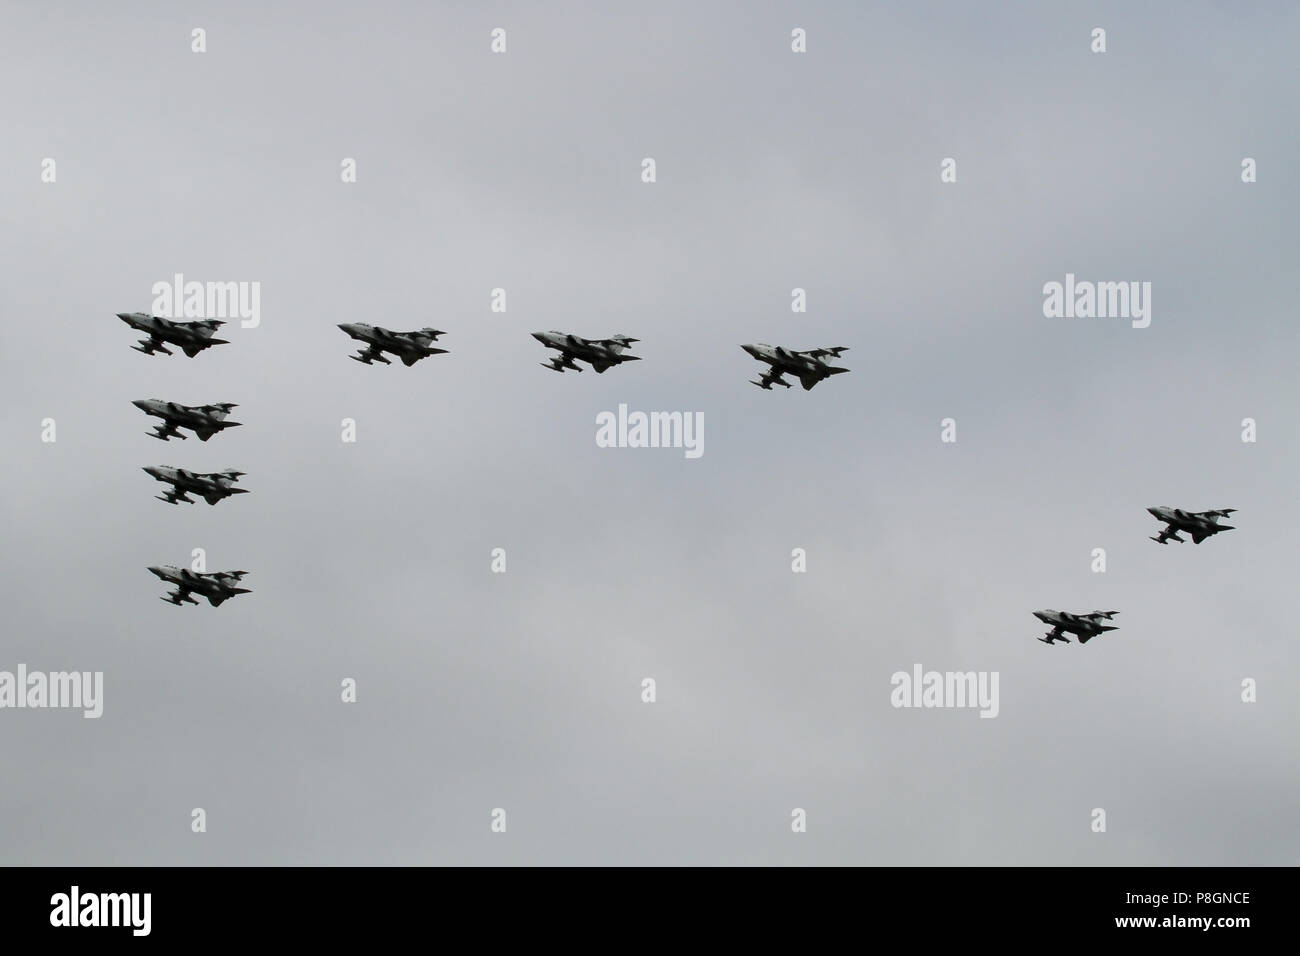 Formation of Tornado GR4's from the Marham wing taking part in the RAF 100 years anniversary flypast, almost certainly their final public flypast. Stock Photo